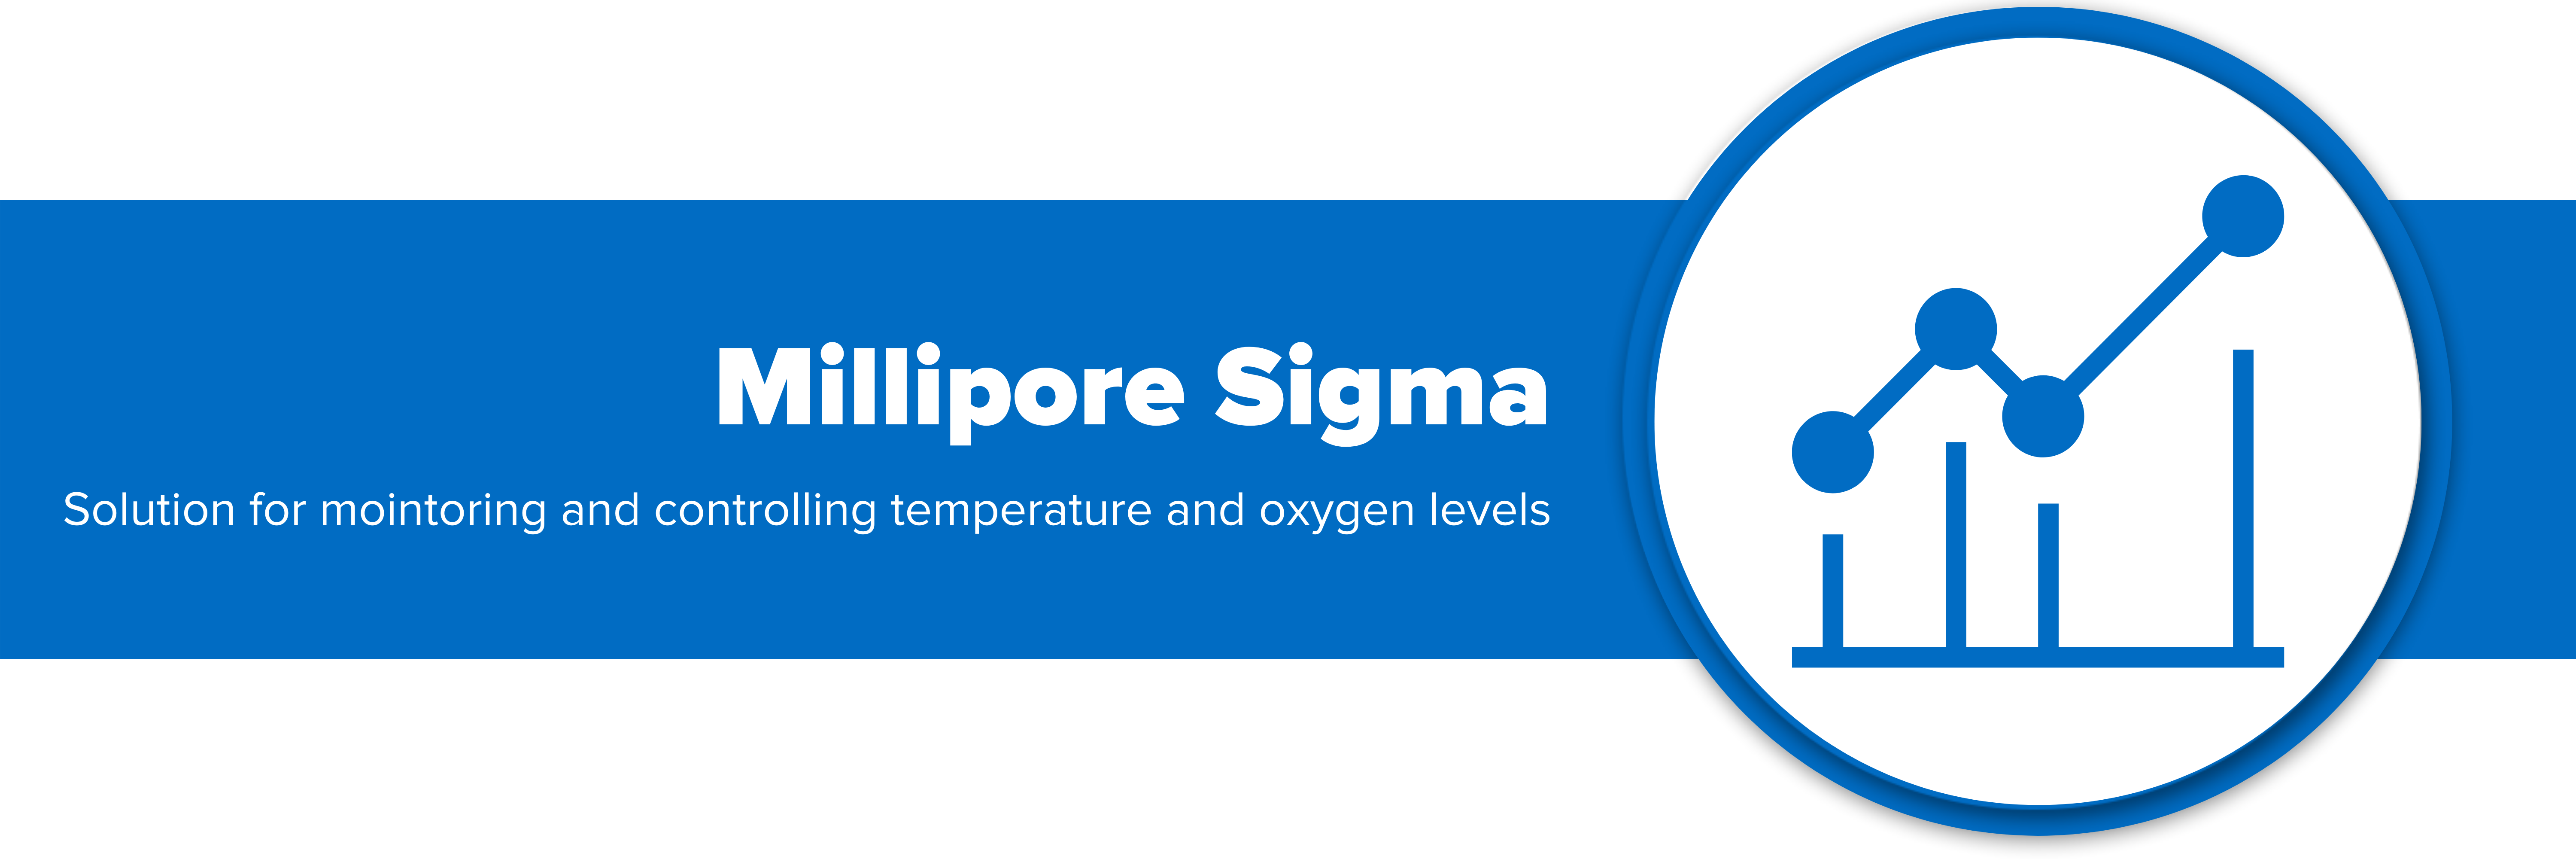 Header image with text "Millipore Sigma"